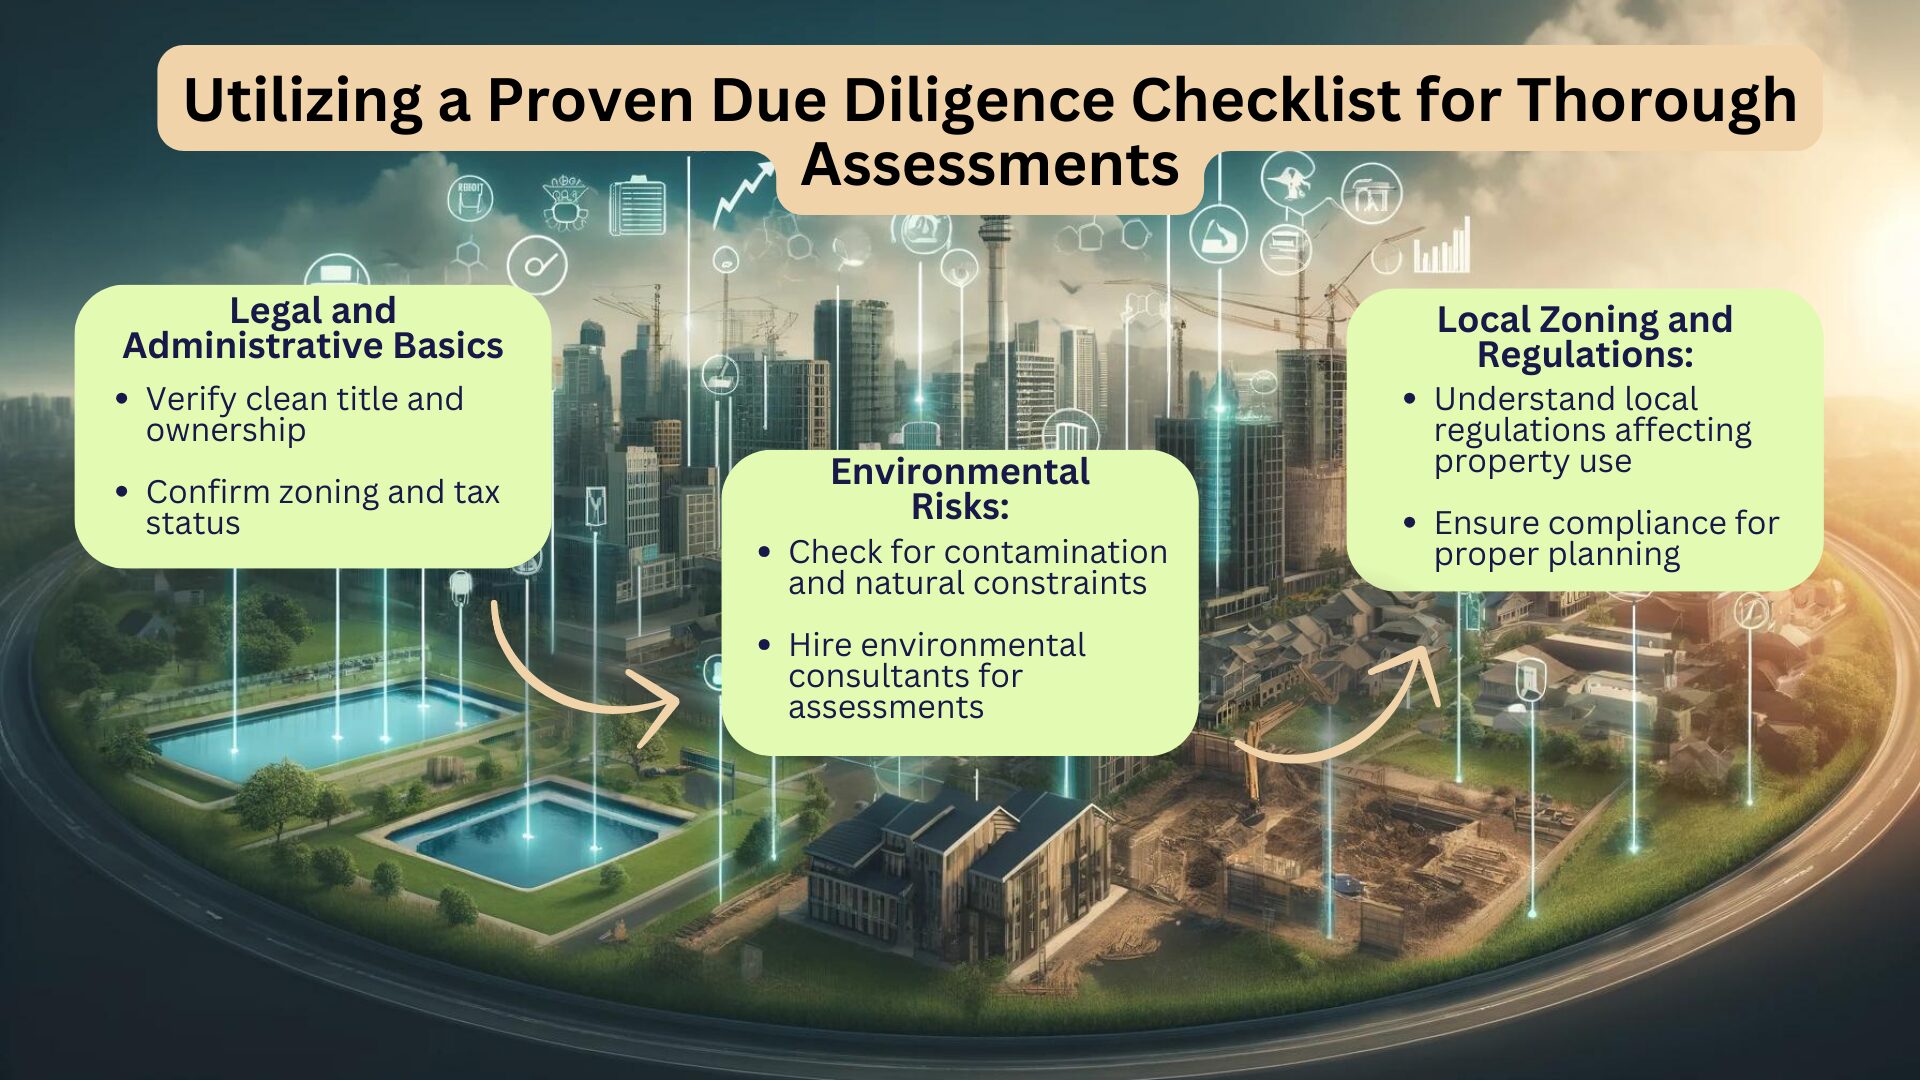 a Proven Due Diligence Checklist for Thorough Assessments 